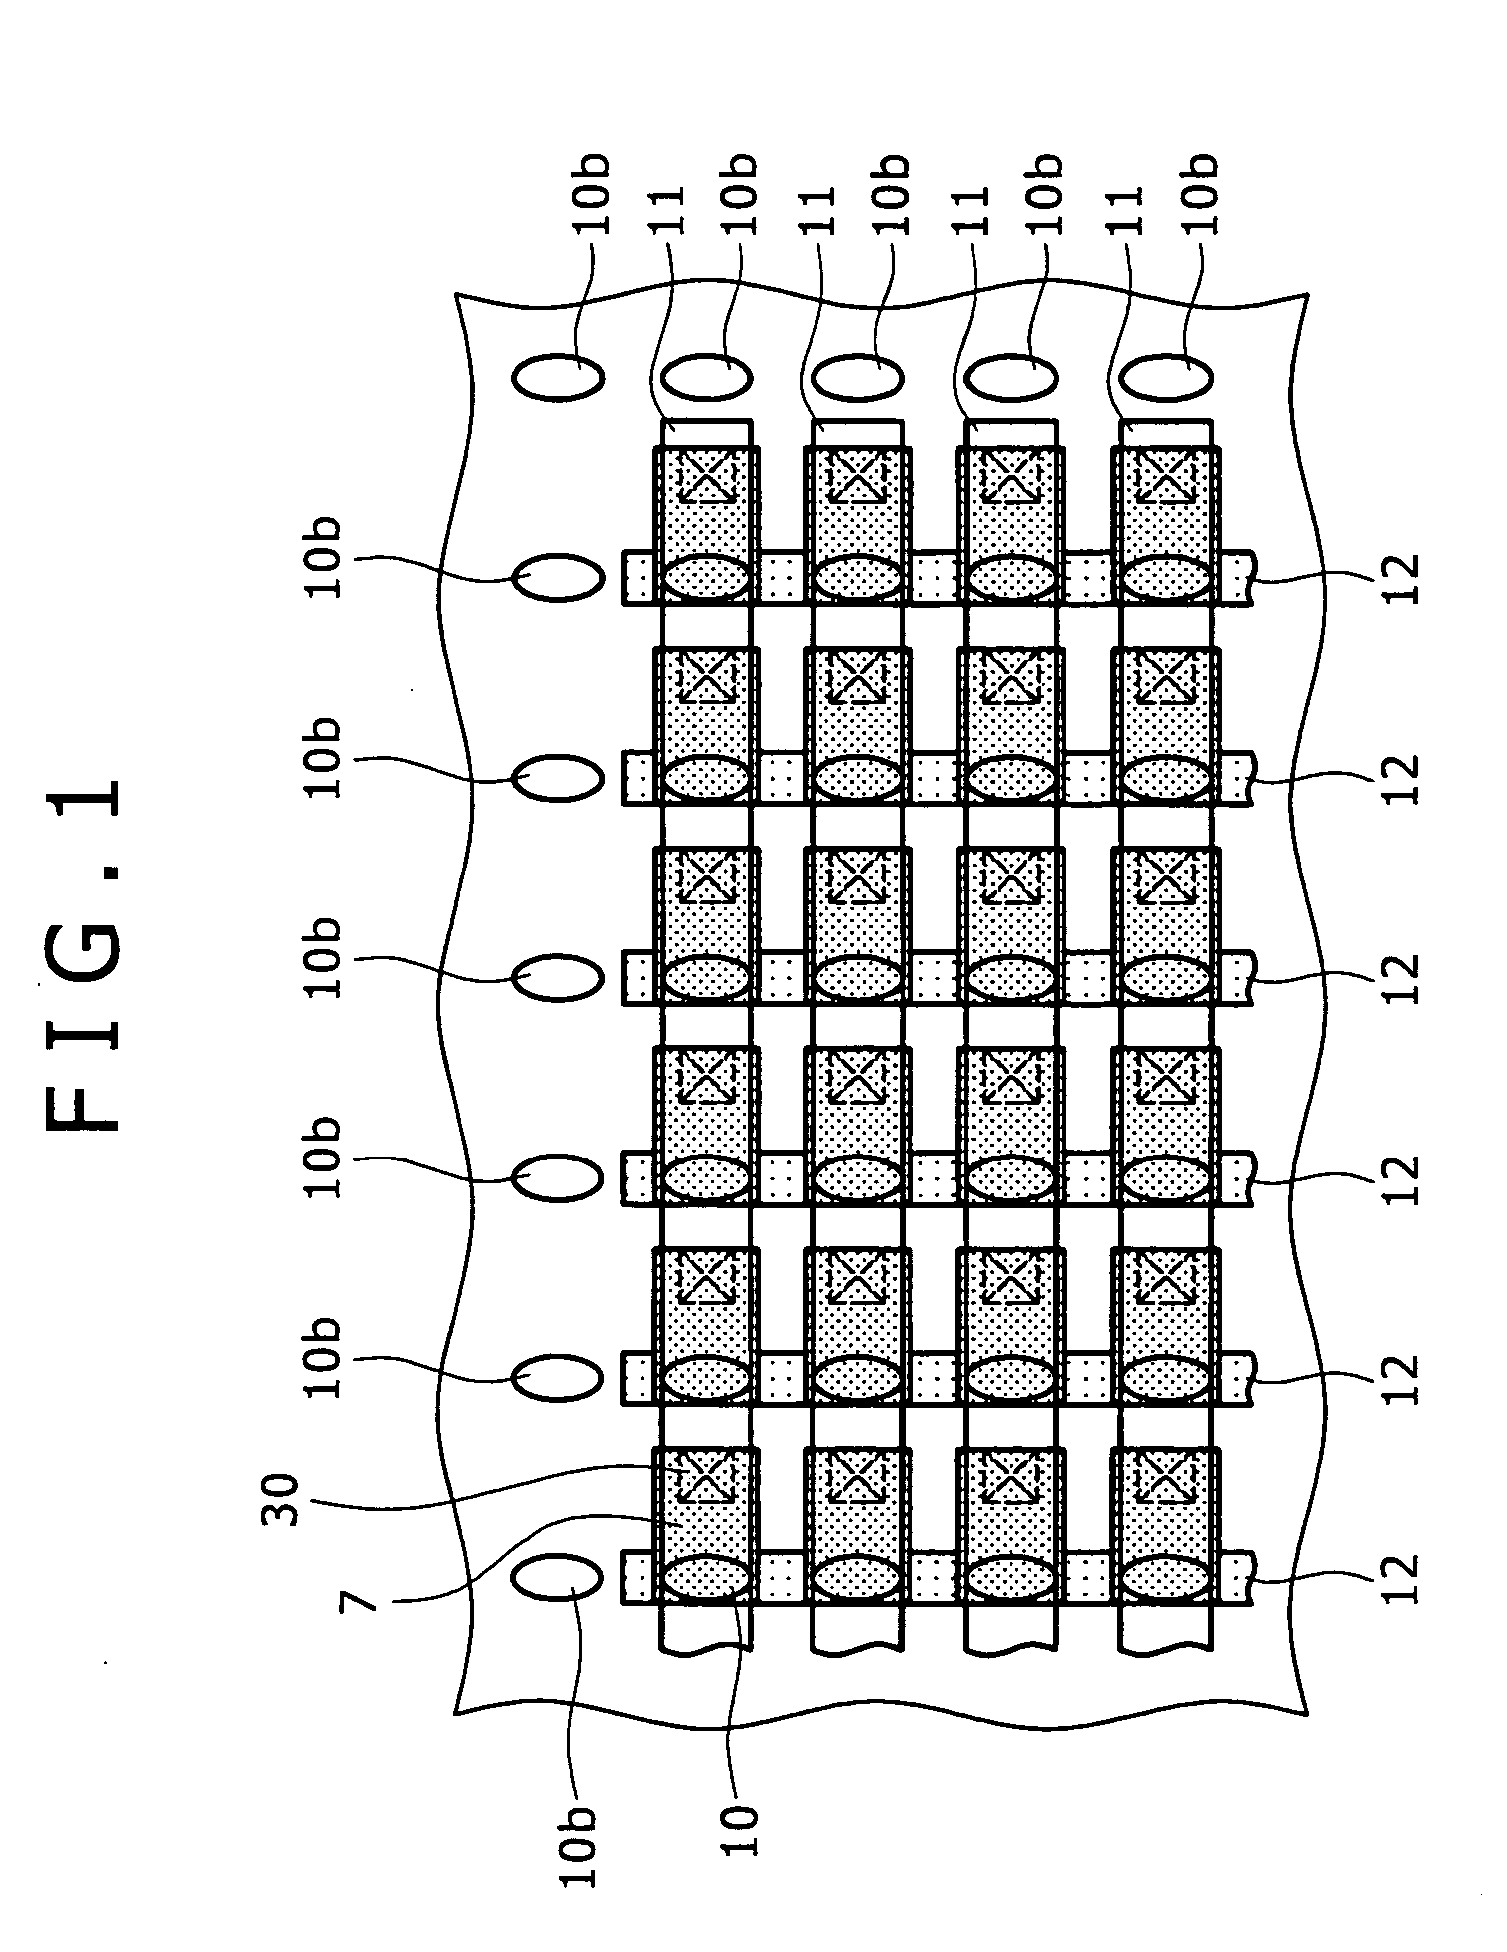 Solid-state memory device and method for arrangement of solid-state memory cells